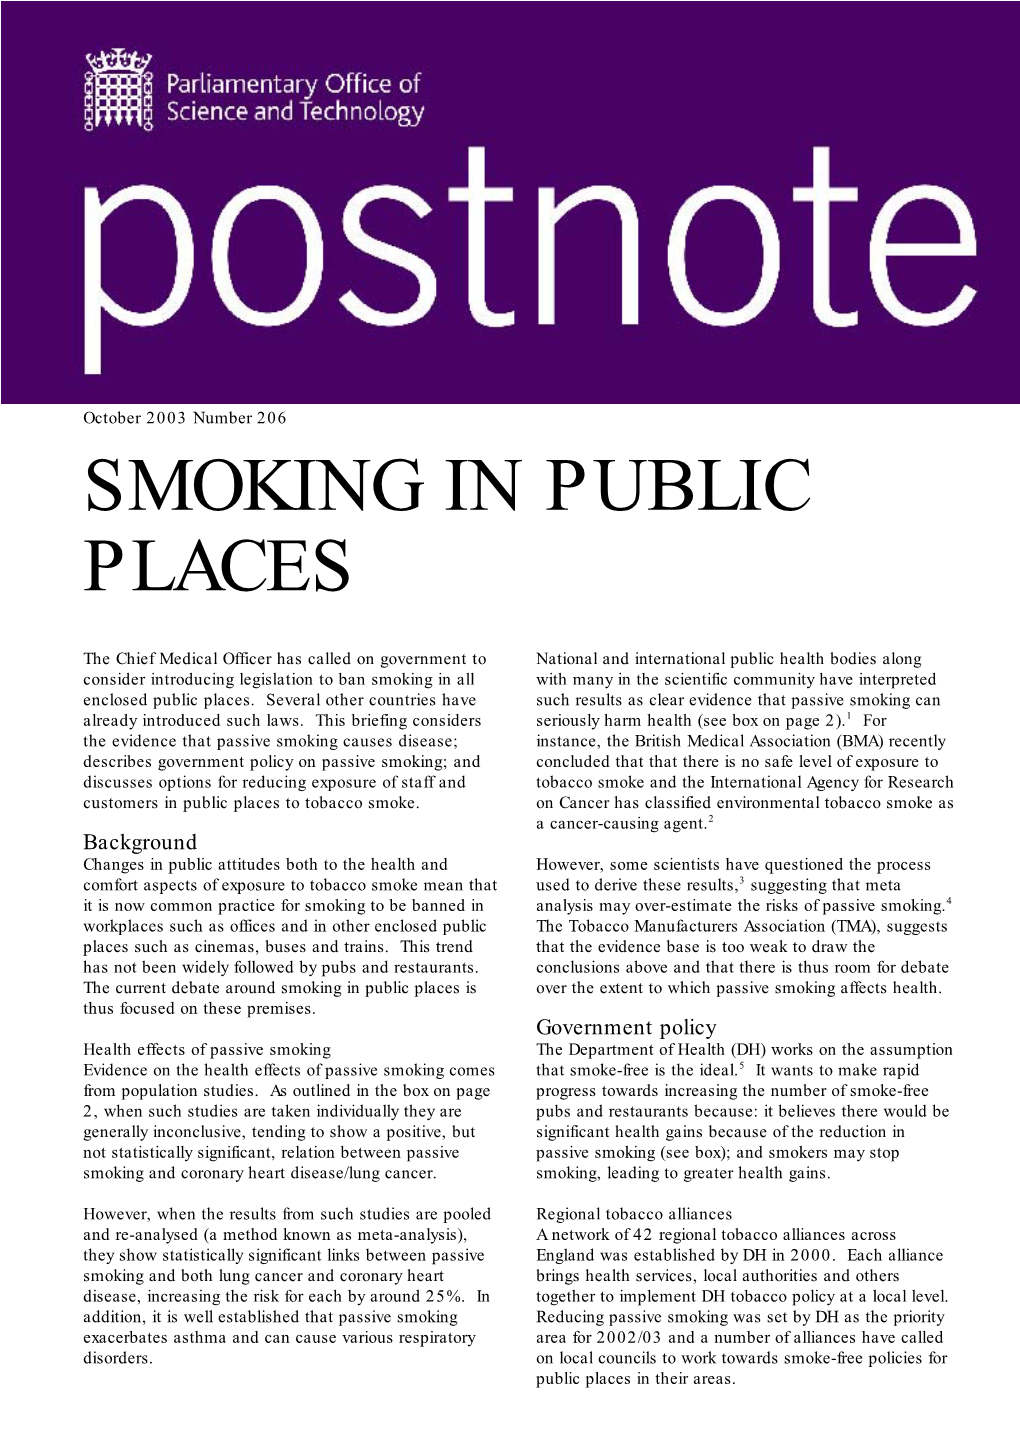 Smoking in Public Places